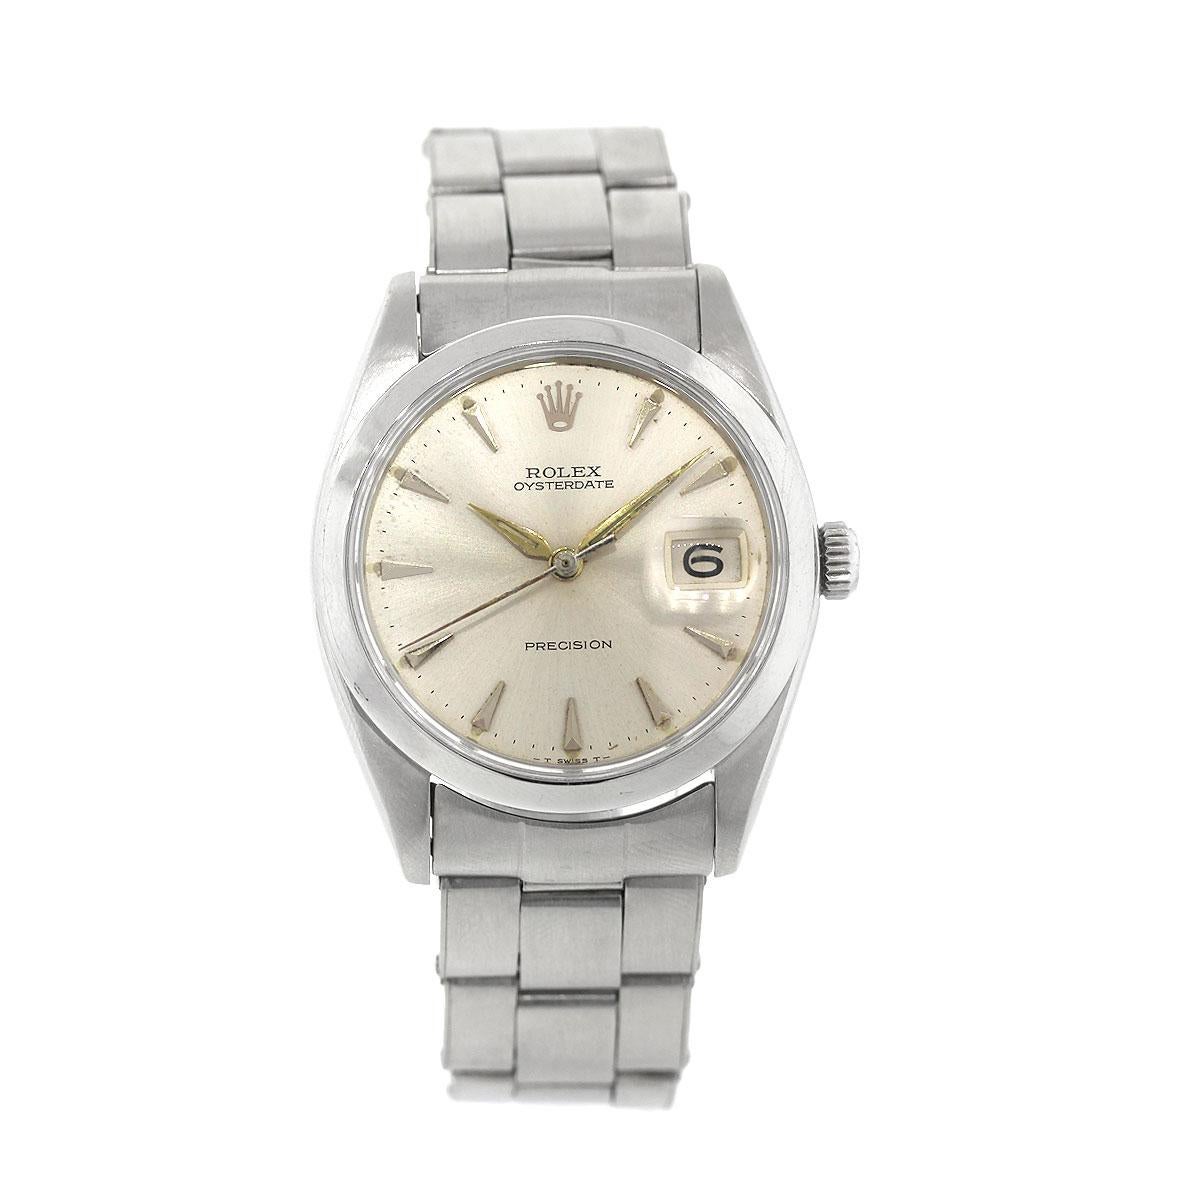 Brand: Rolex
MPN:  6694
Model:  Datejust
Case Material: Stainless Steel
Case Diameter: 36mm
Crystal: Plastic
Bezel: Smooth stainless steel bezel
Dial: Silvered dial with date window at the 3 o’clock position
Bracelet: Brushed stainless steel Oyster